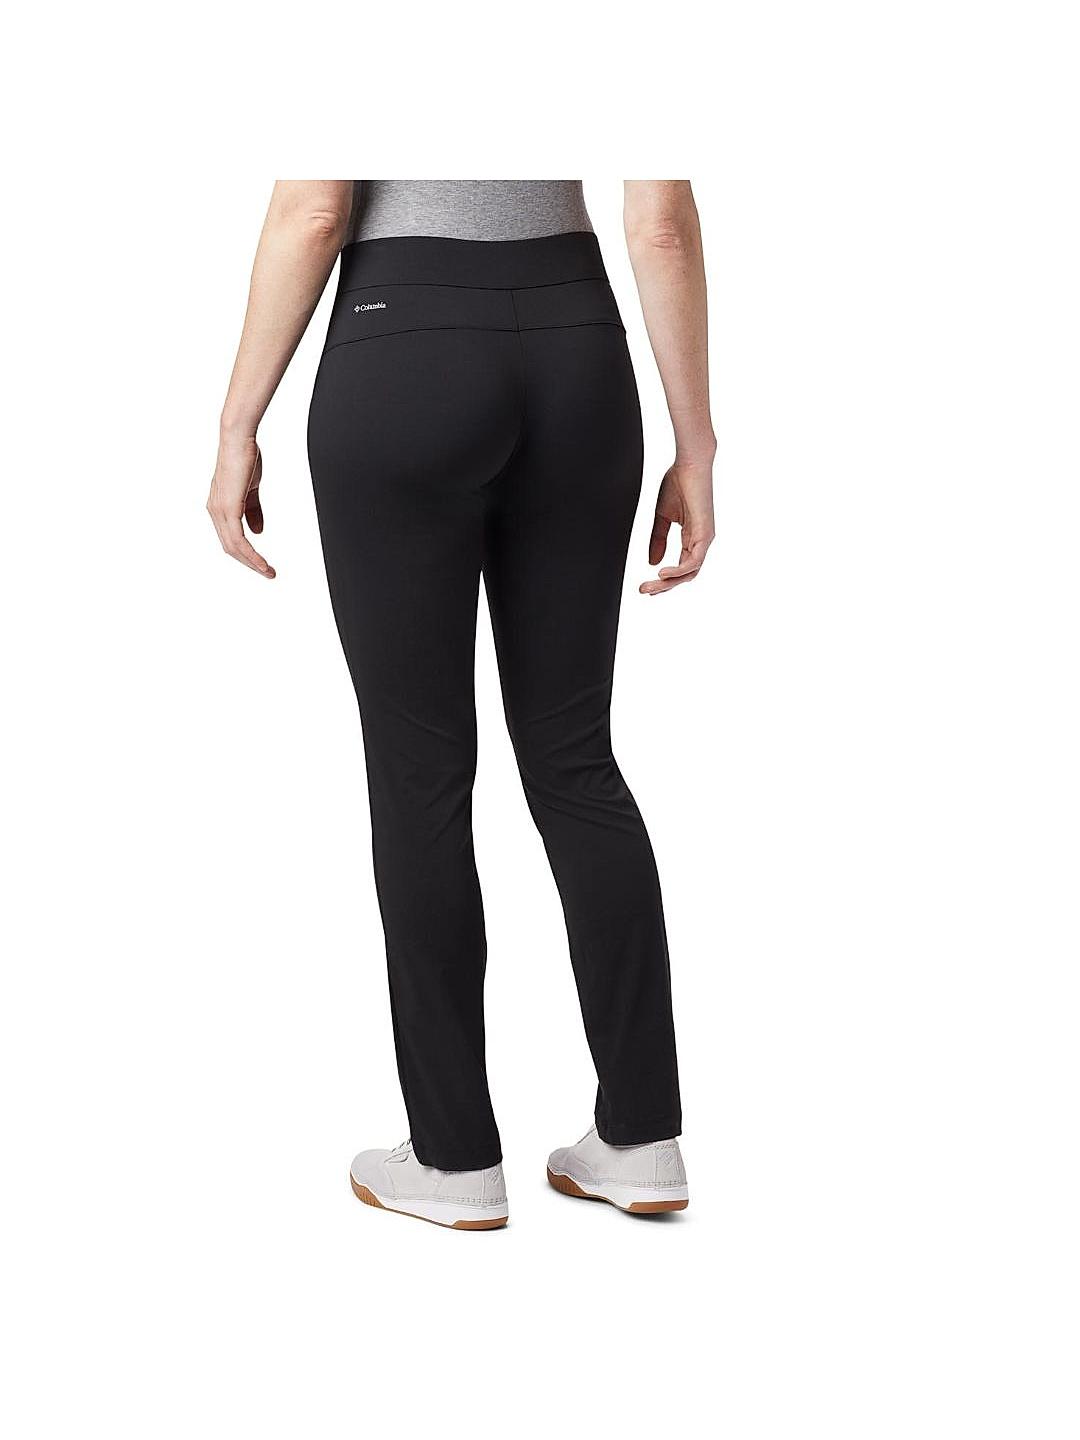 symoid Womens Casual Pants- Fashion Casual Solid StretchCotton and Linen Trousers  Pants Black XL - Walmart.com